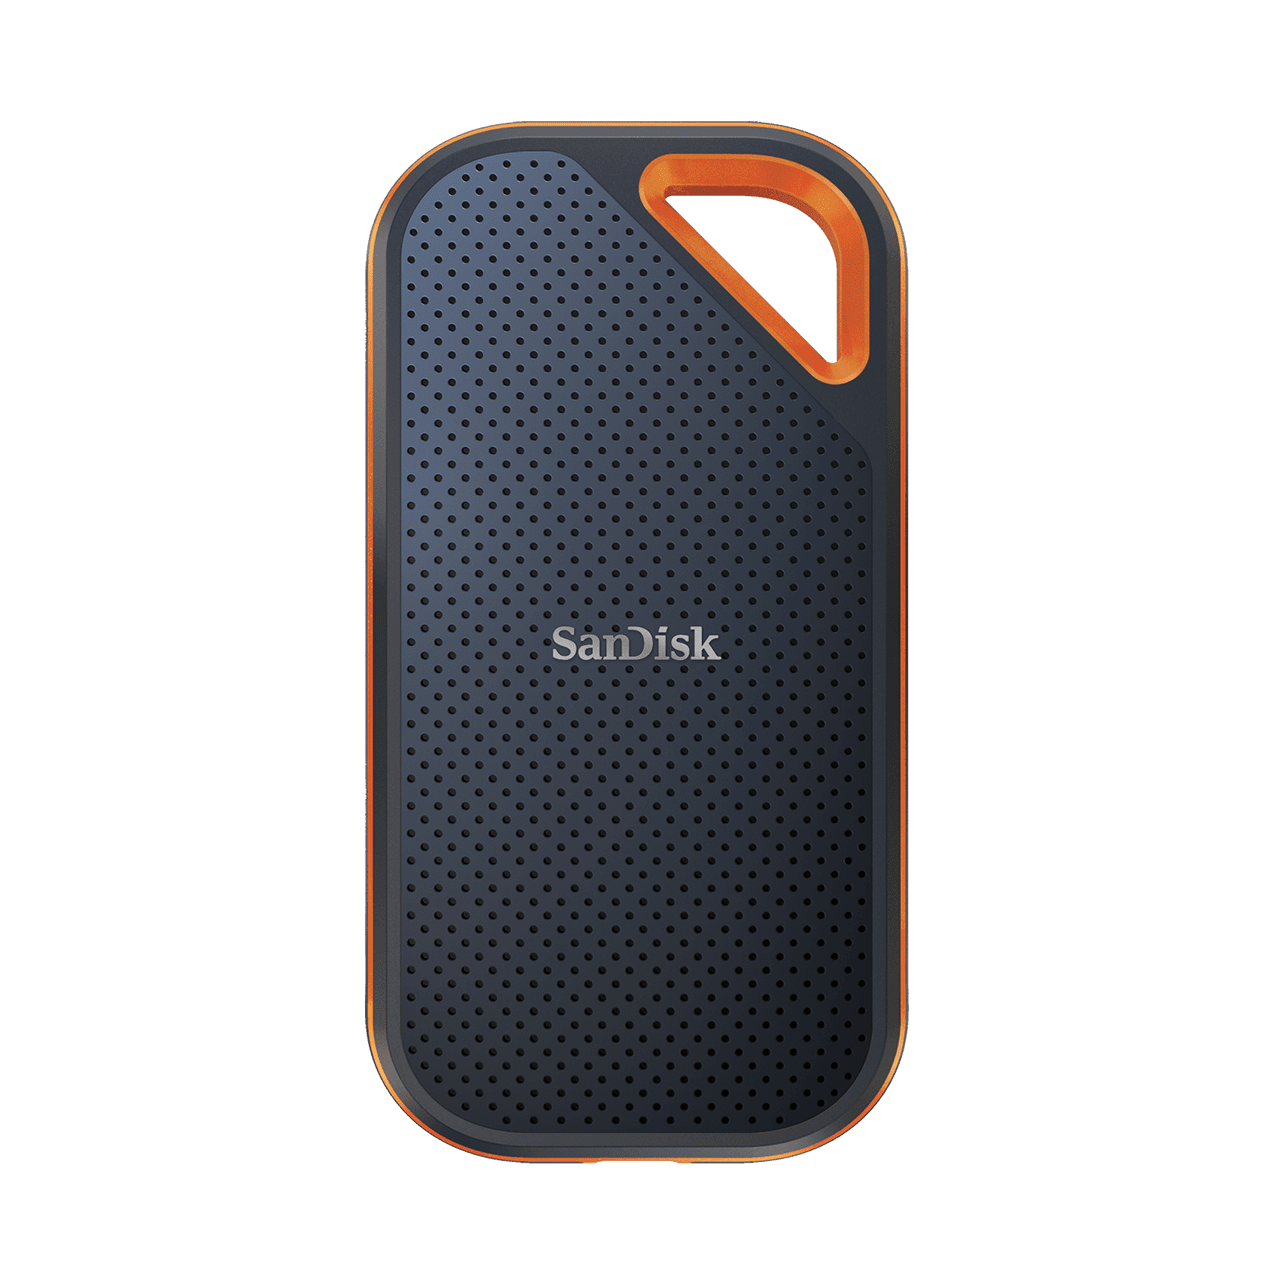 【2TB】SanDisk Extreme Portable SSD